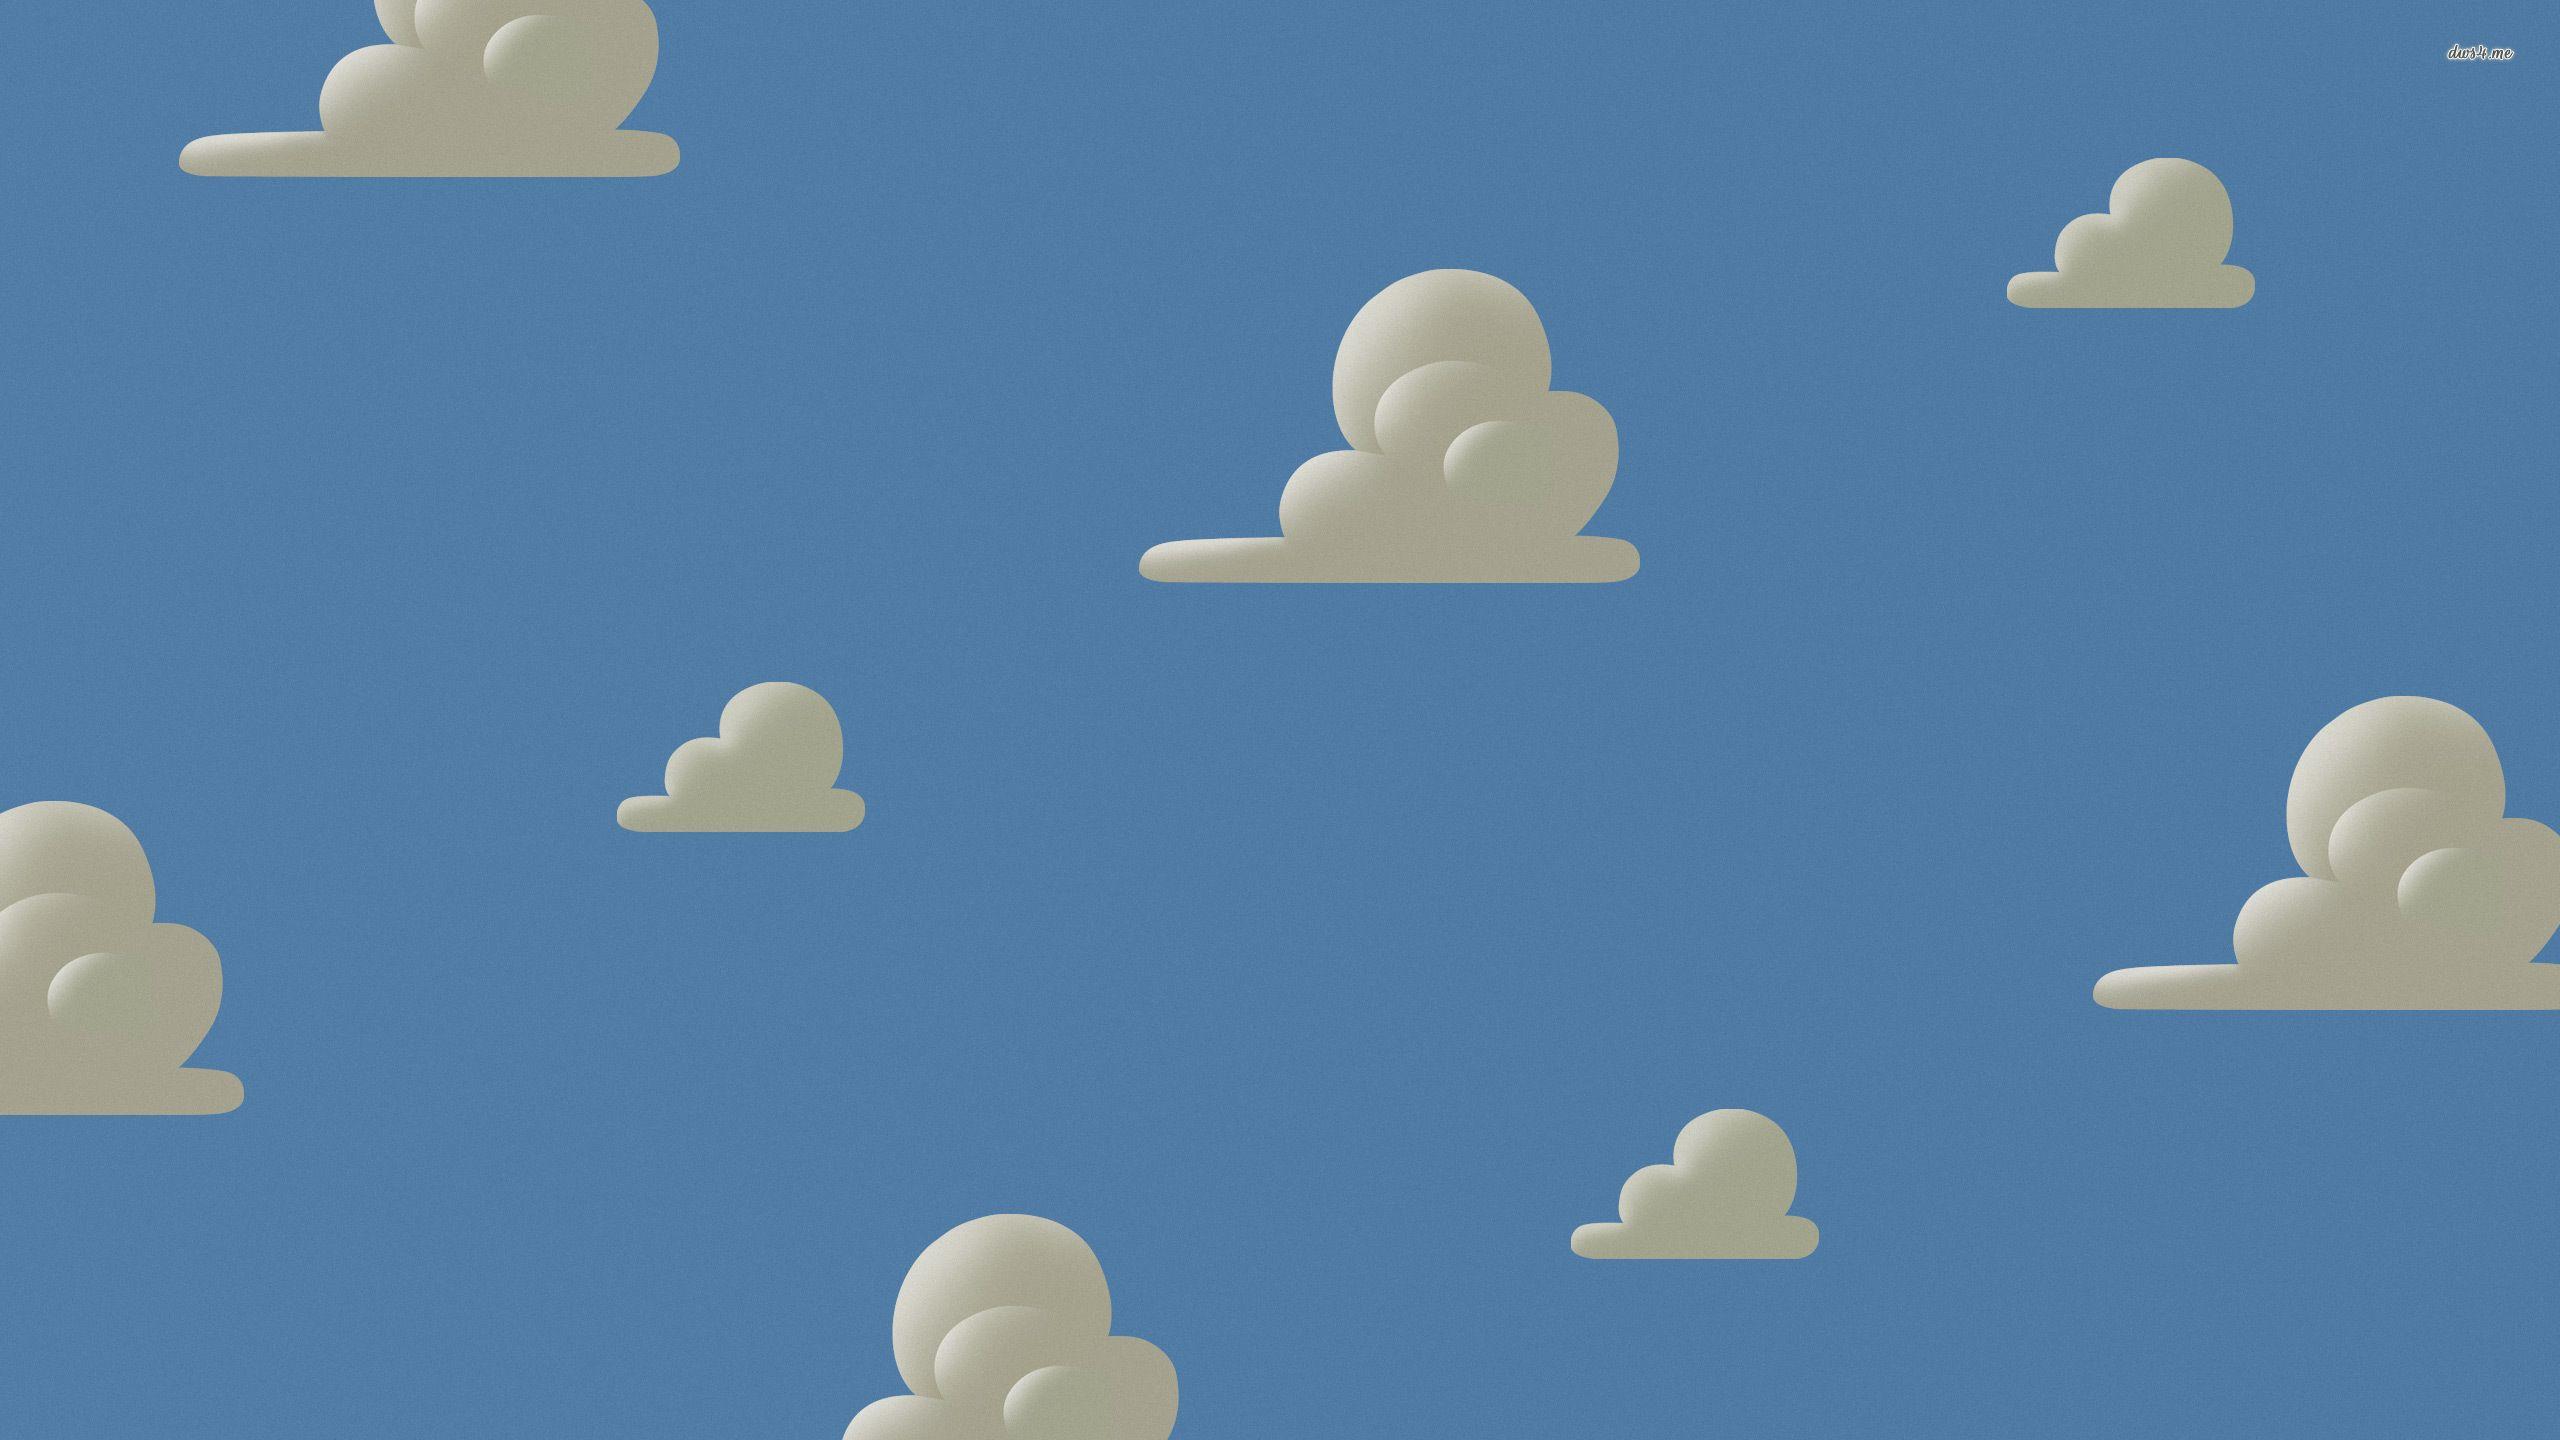 Download Toy Story Background Clouds White Clouds RoyaltyFree Stock  Illustration Image  Pixabay